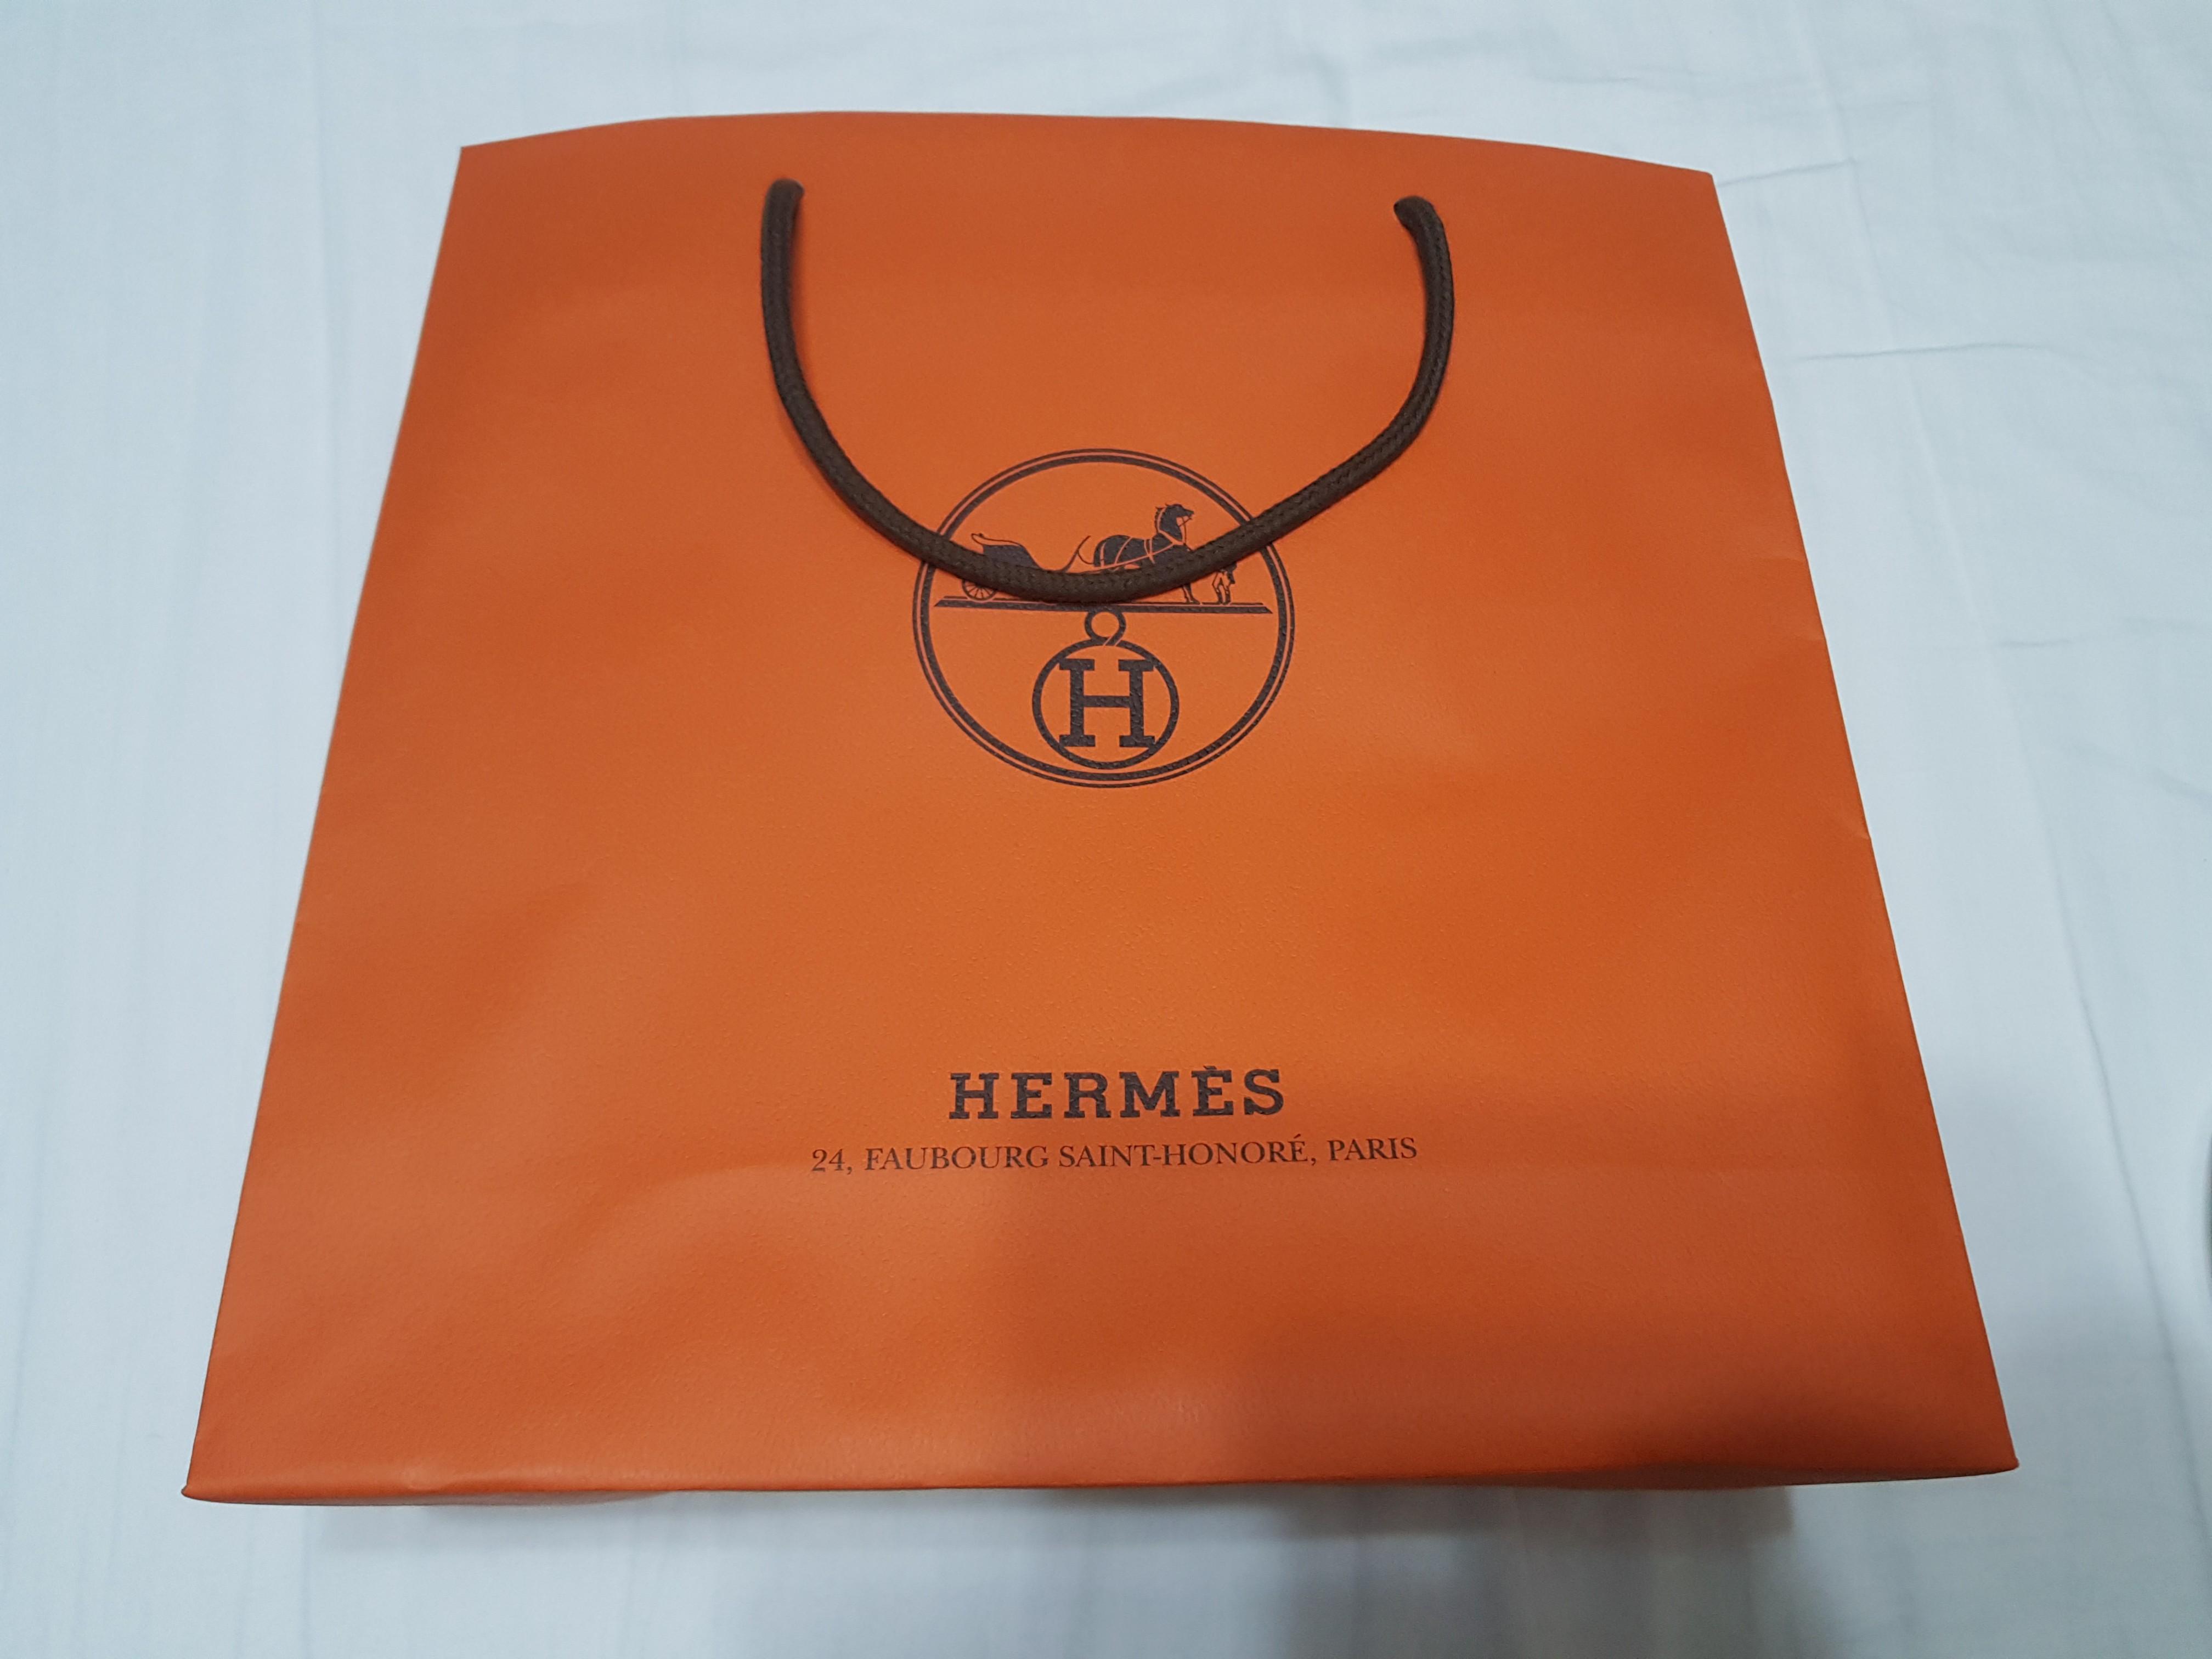 Hermes Paper Bag For Sale year 2020, Everything Else, Others on Carousell